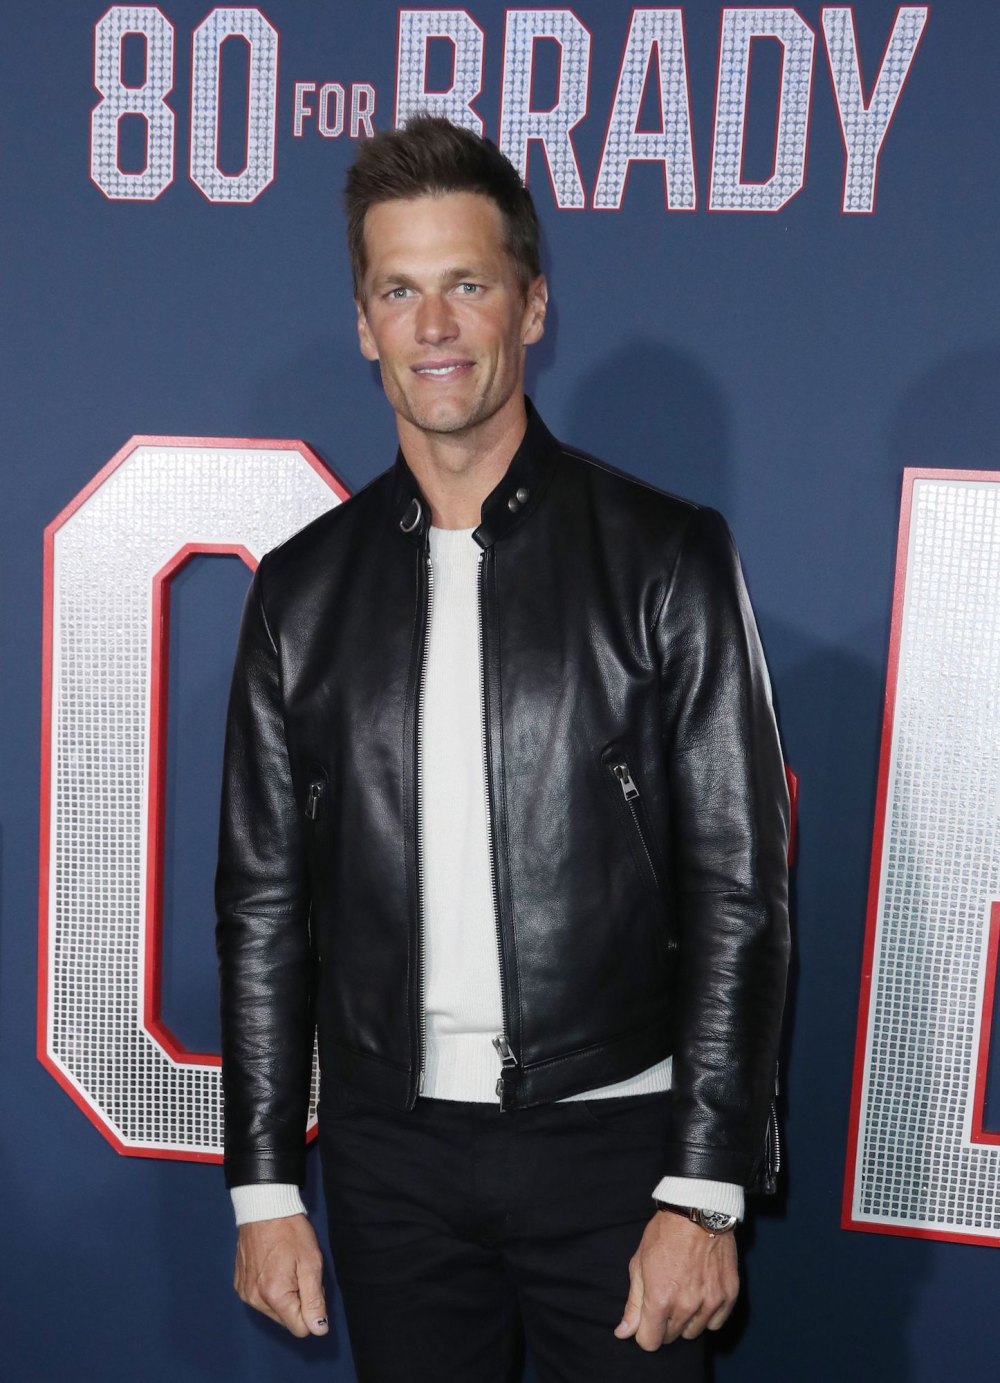 Tom Brady Reveals He Prioritizing the Things that Mean the Most After NFL Retirement